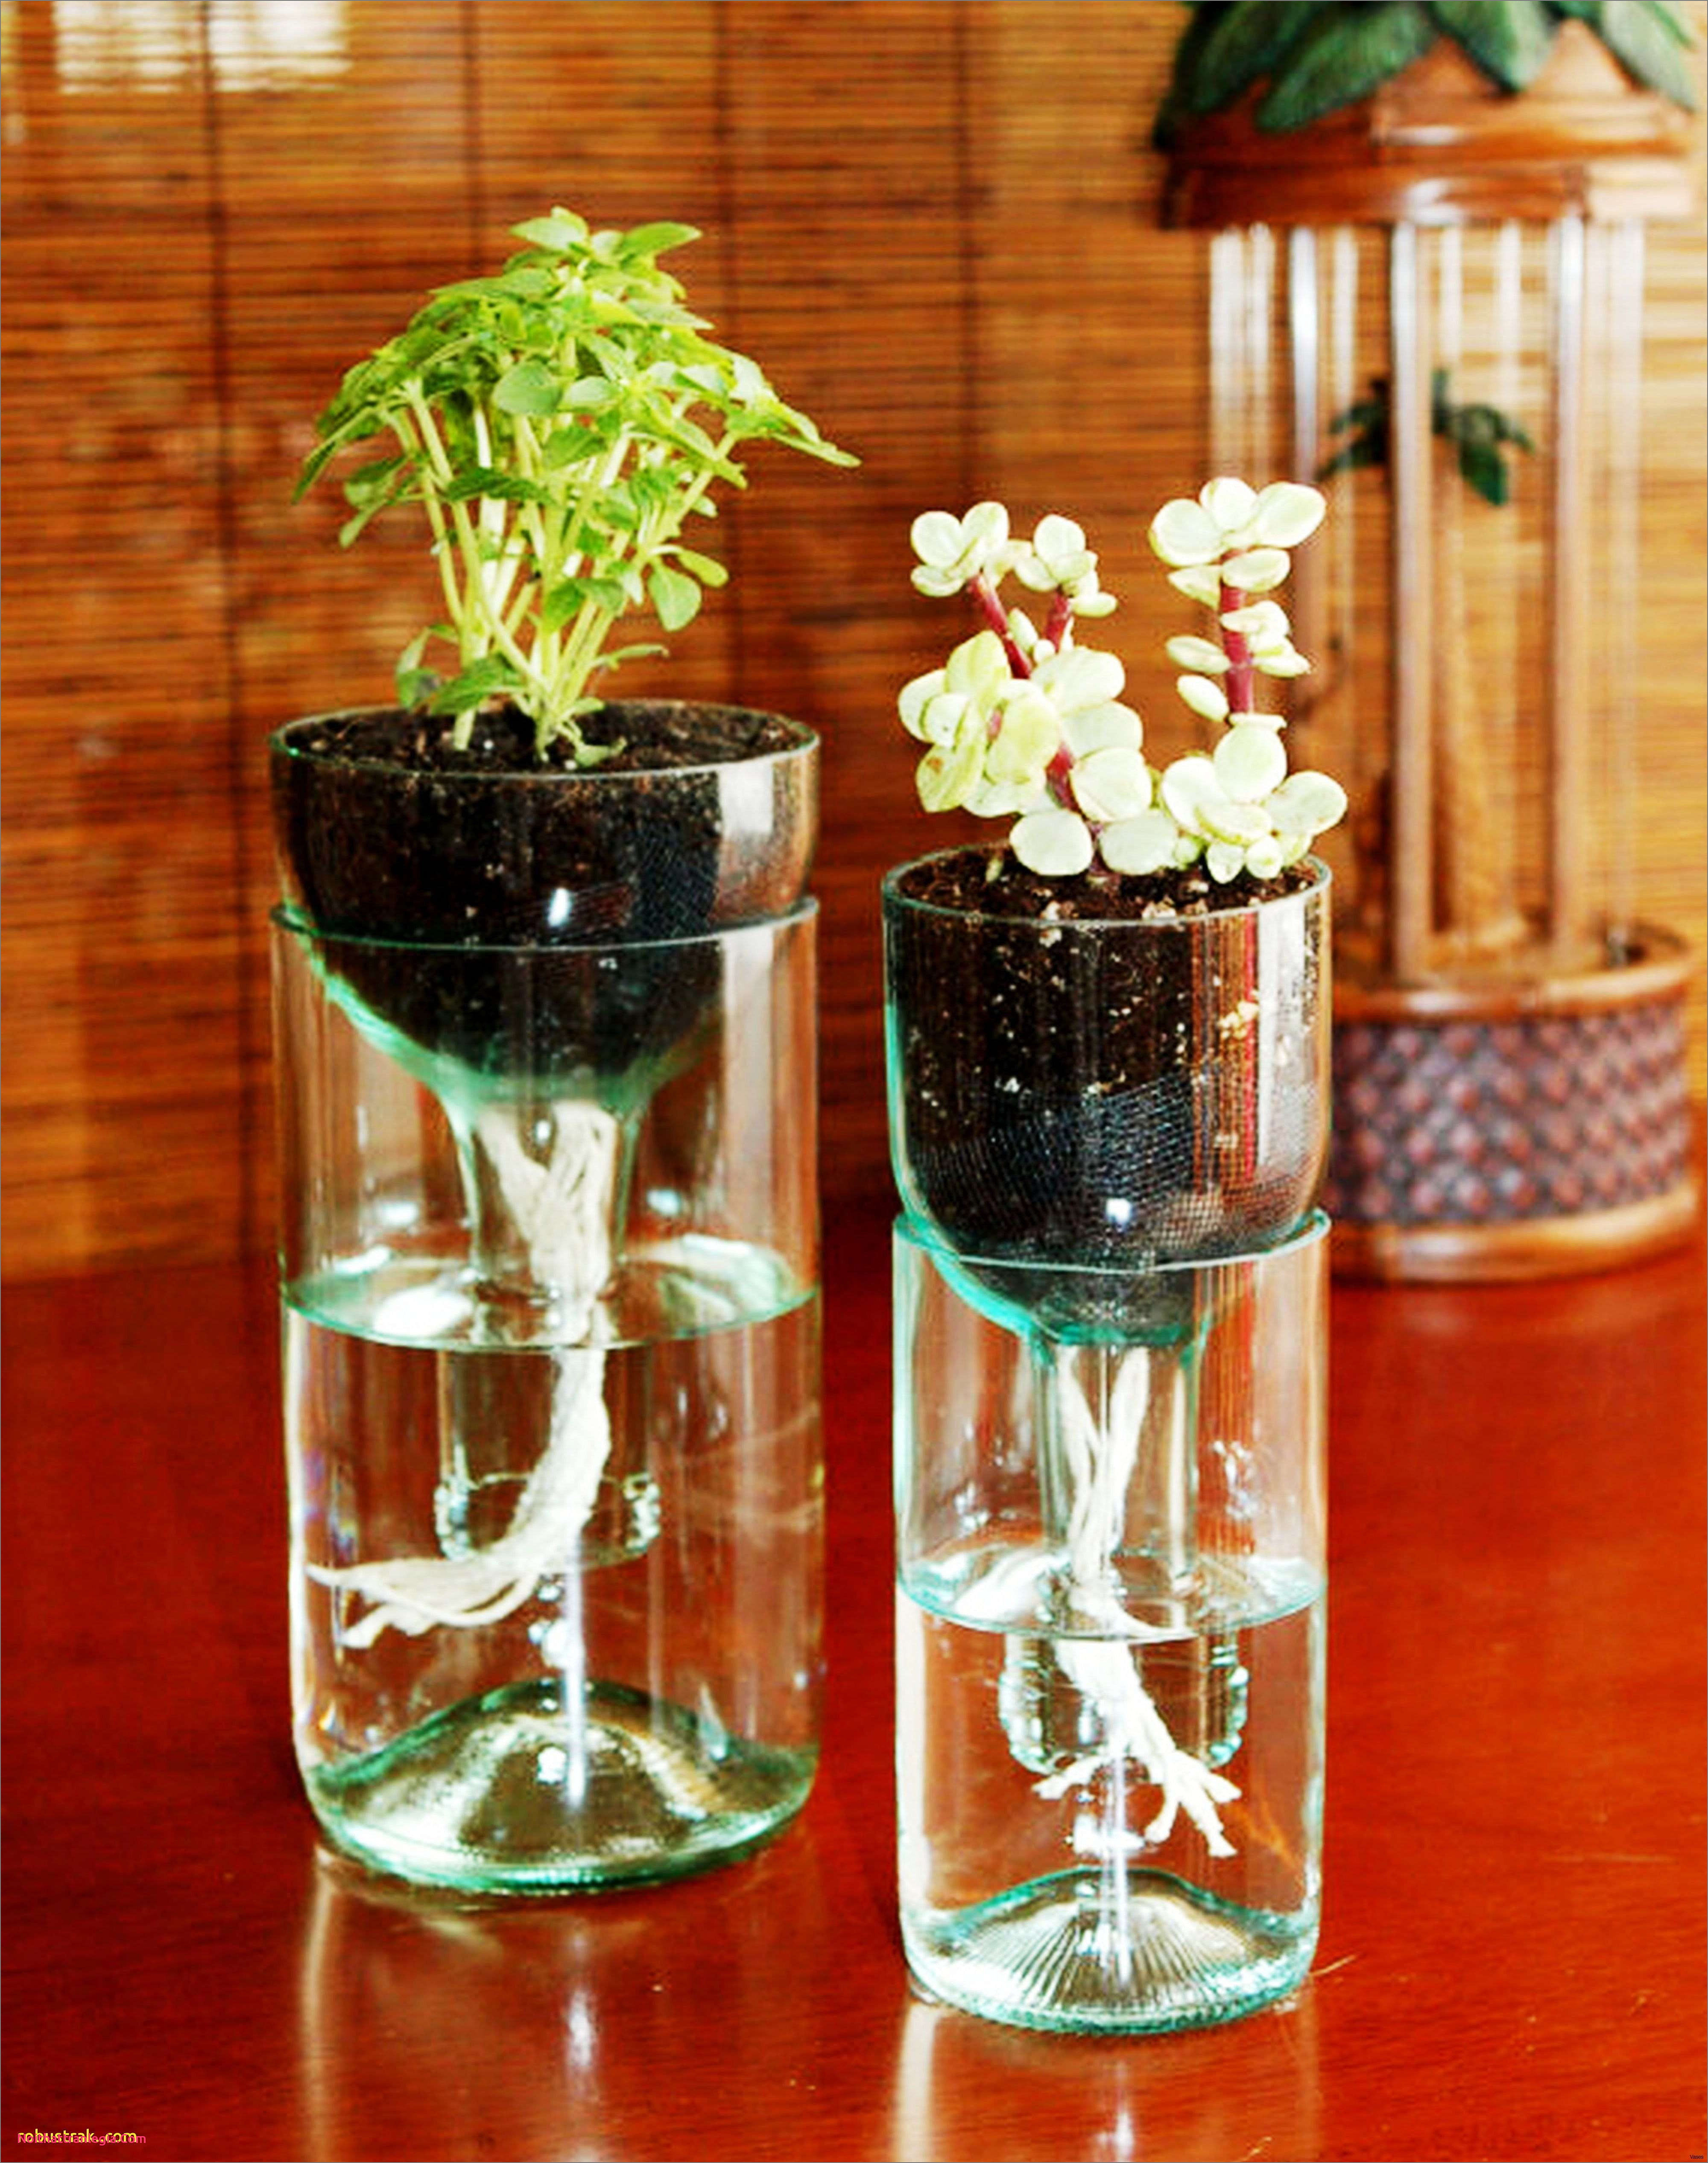 cheap glass vases for centerpieces uk of 20 how to make mercury glass vases noithattranlegia vases design throughout glass bowl centerpiece decorating ideas awesome unique glass bowl centerpiece decorating ideas